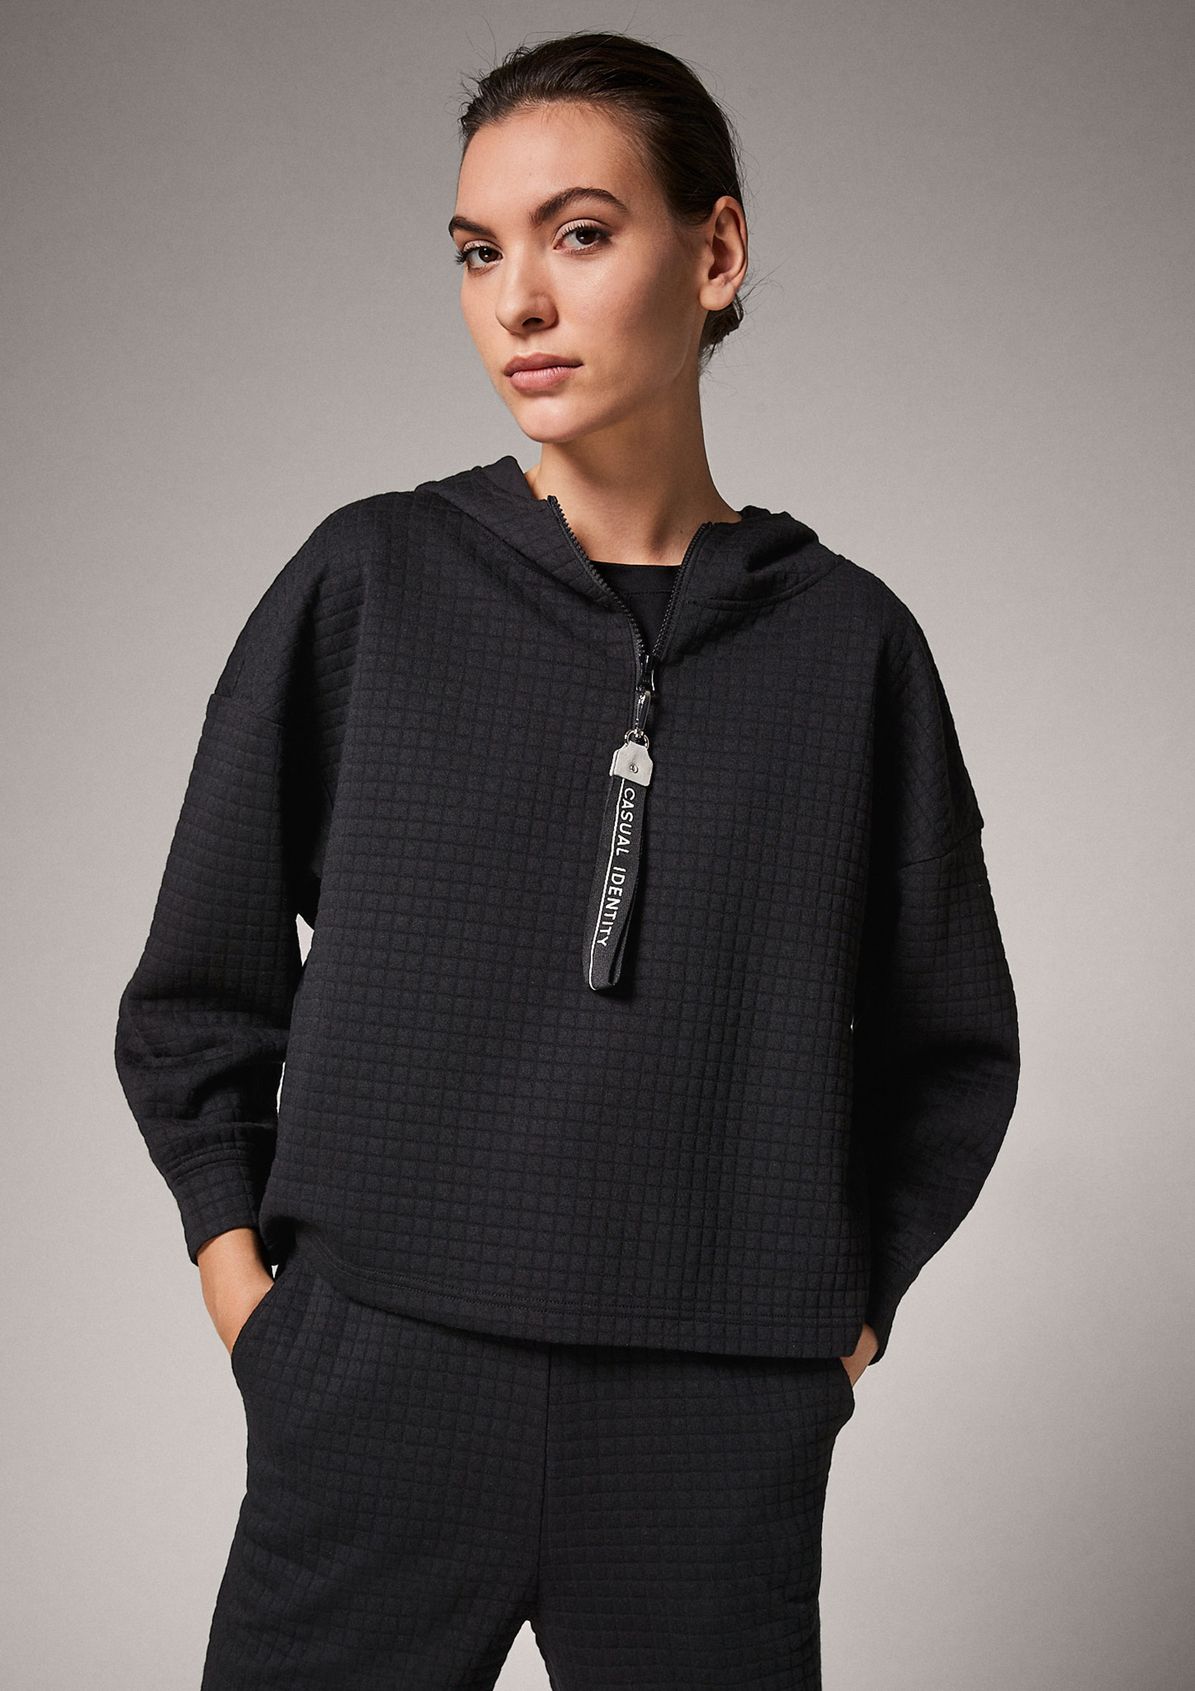 Sweatshirt with a textured pattern from comma